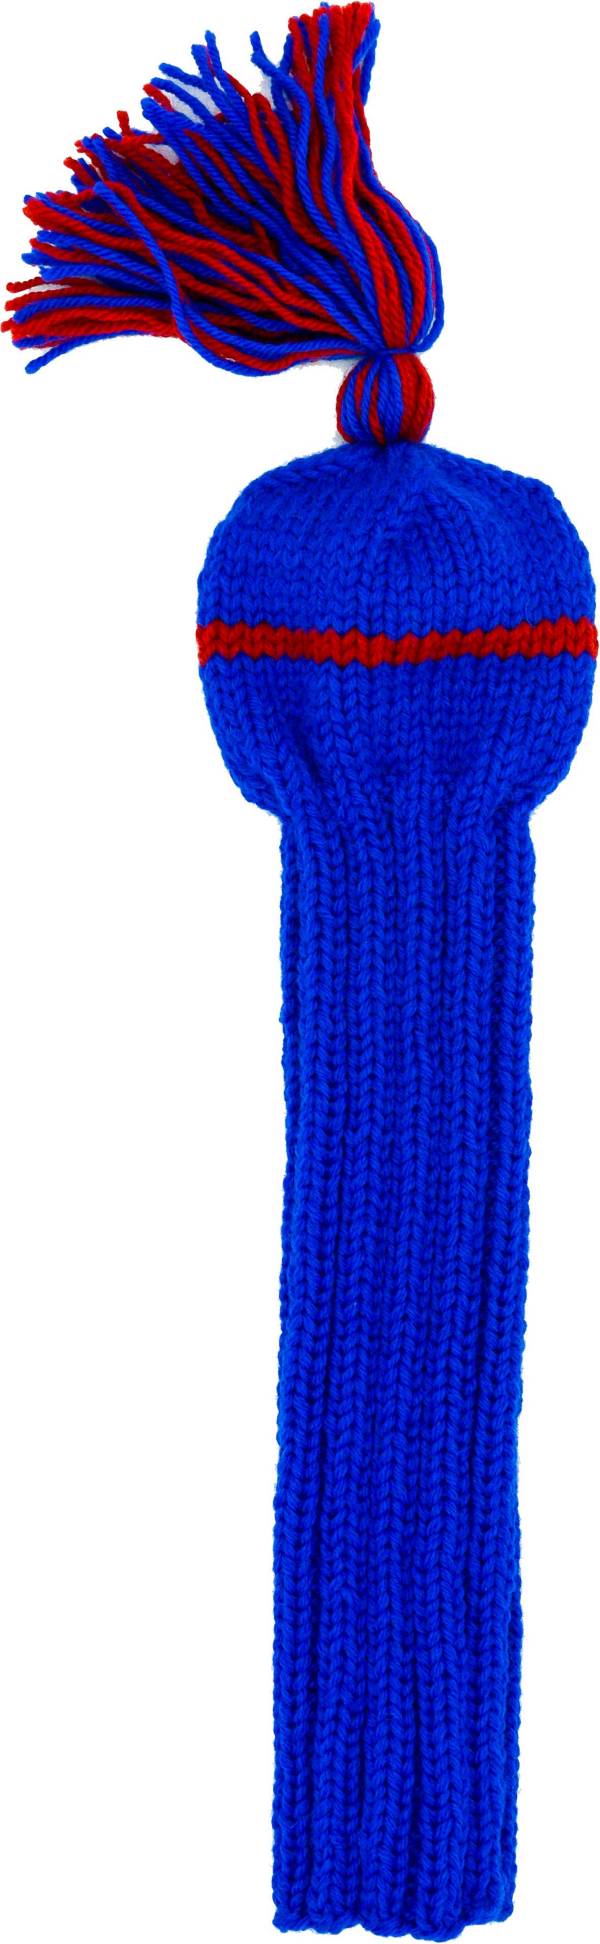 Jan Craig Knit Driver Headcover product image